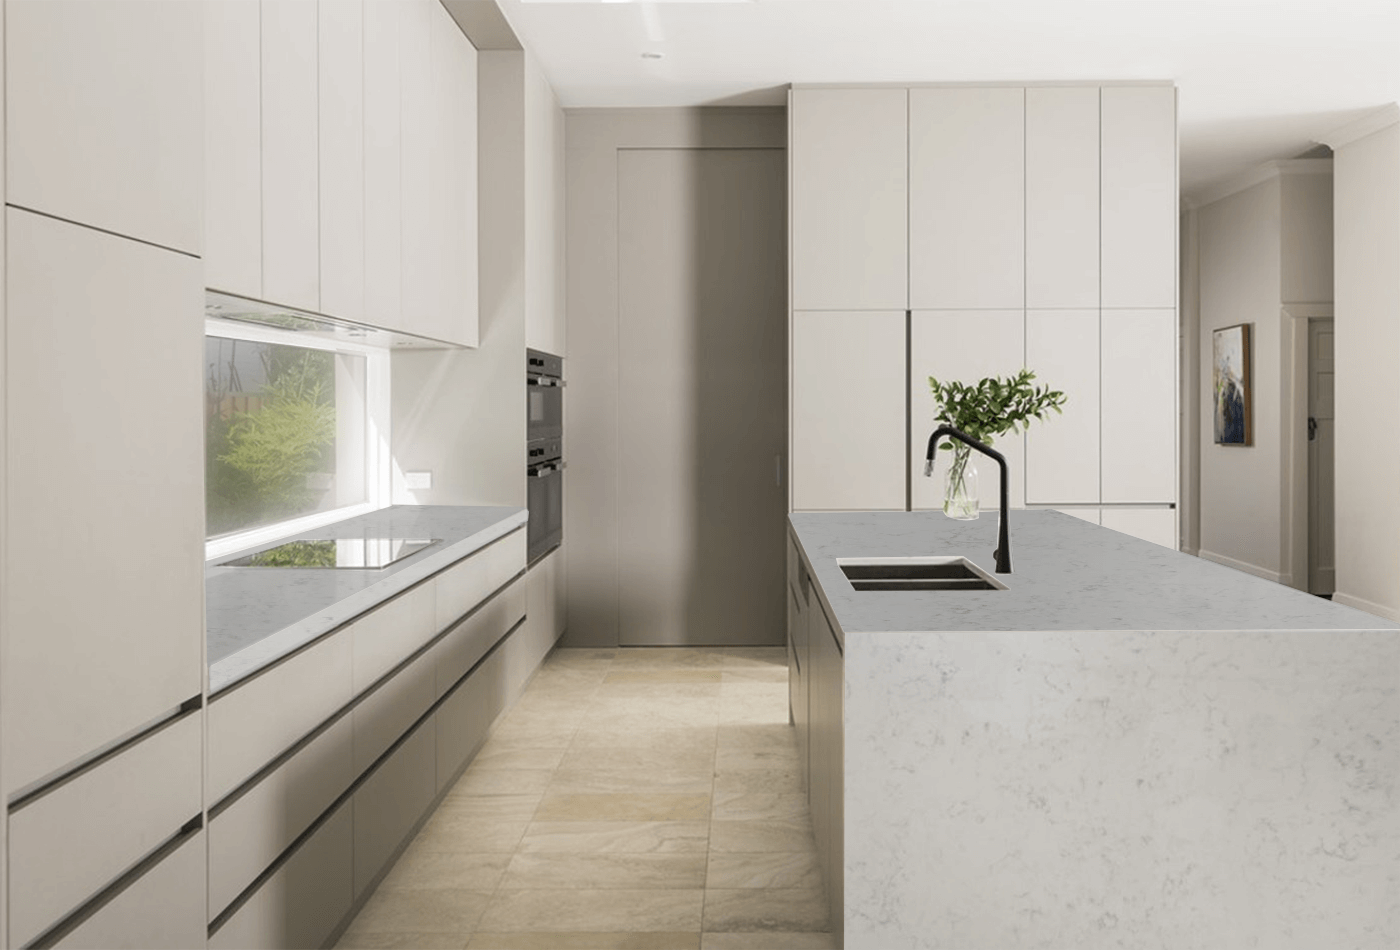 Try styling your Carrera Extra Quartz Leftovers for your Kitchen